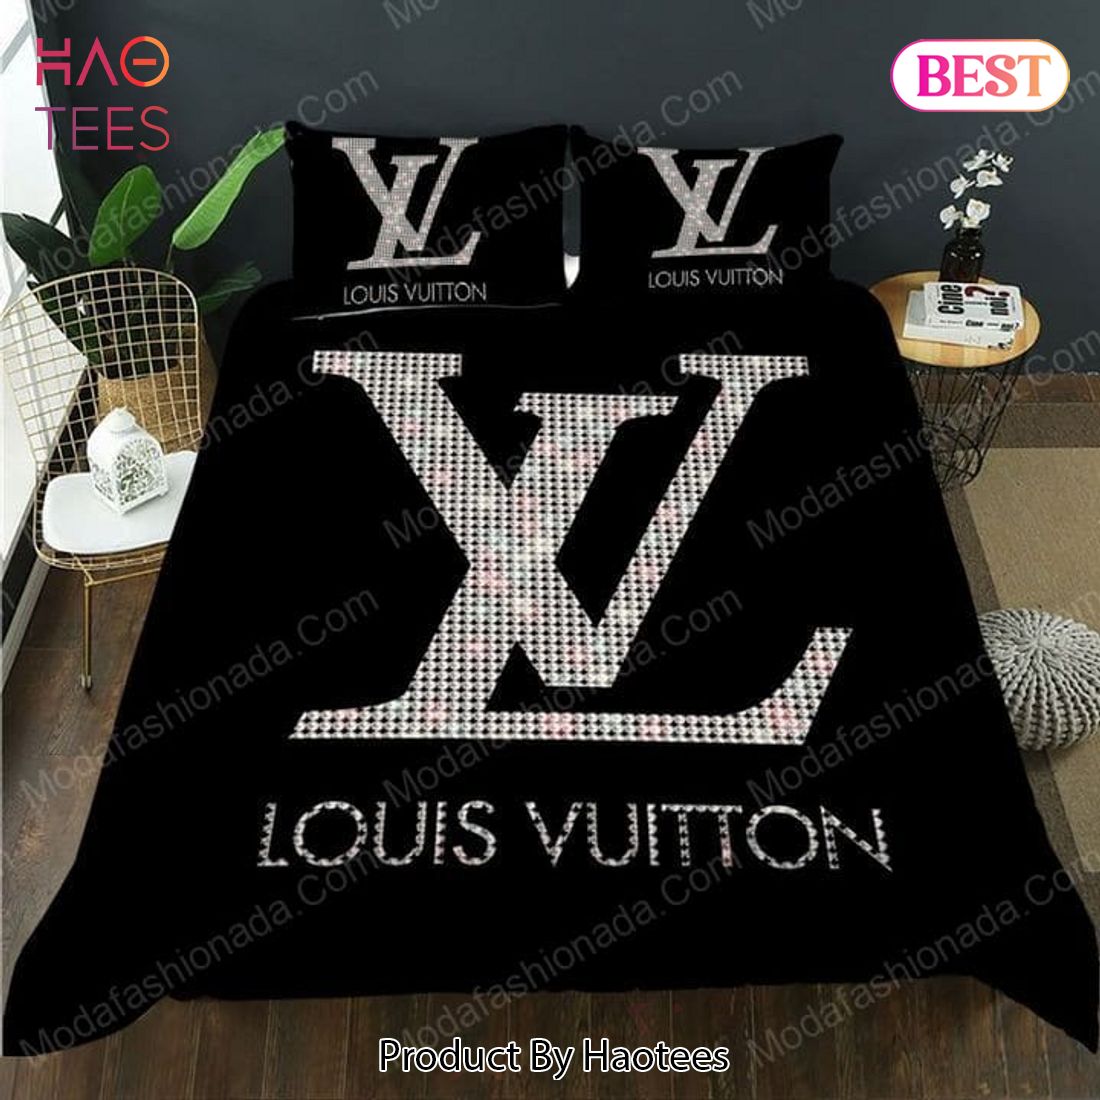 Is buying Louis Vuitton or other high end brands a good investment